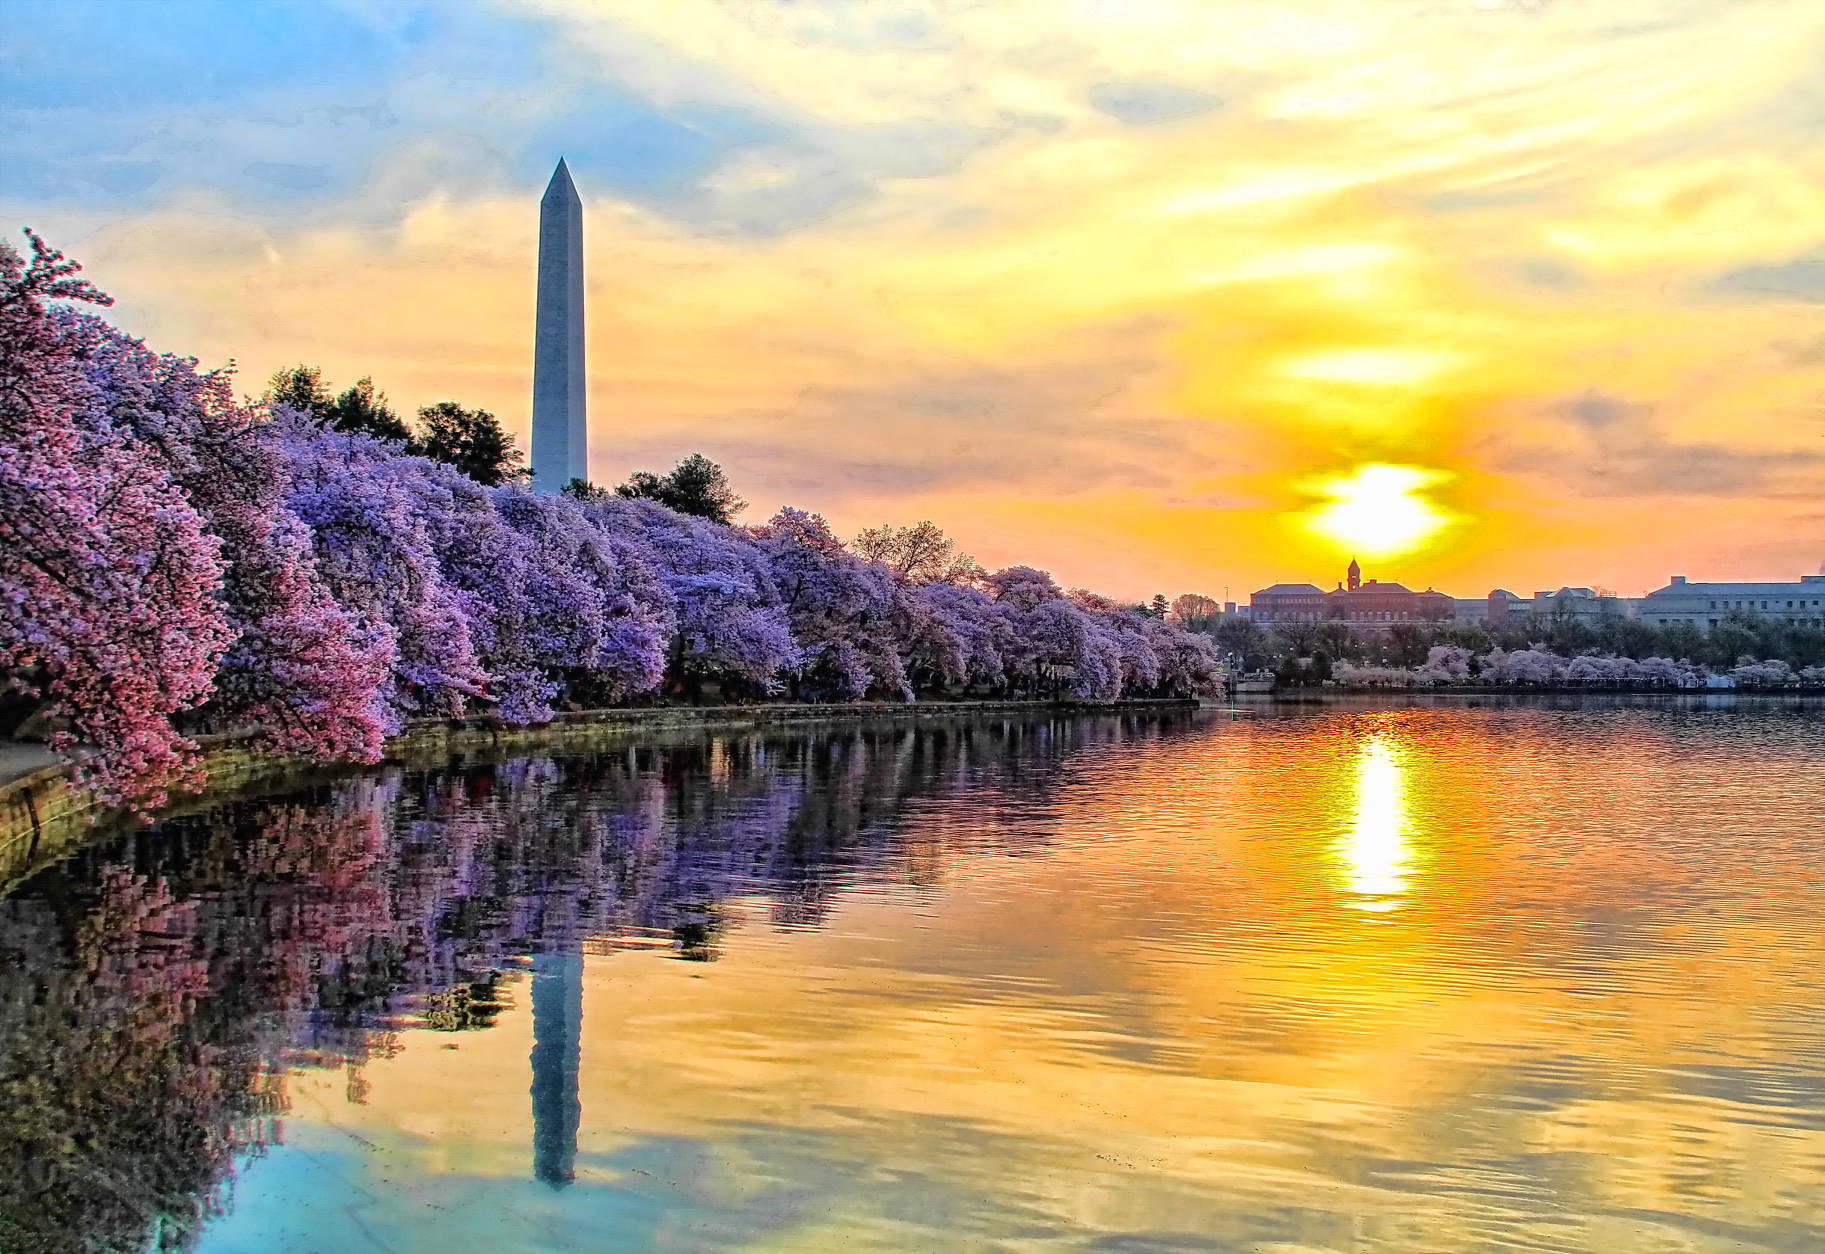 11. Washington, D.C.

The seat of government is No. 11 in Condé Nast Traveler's "The Best Big U.S. Cities." (Getty Images/iStockphoto/DavidByronKeener)